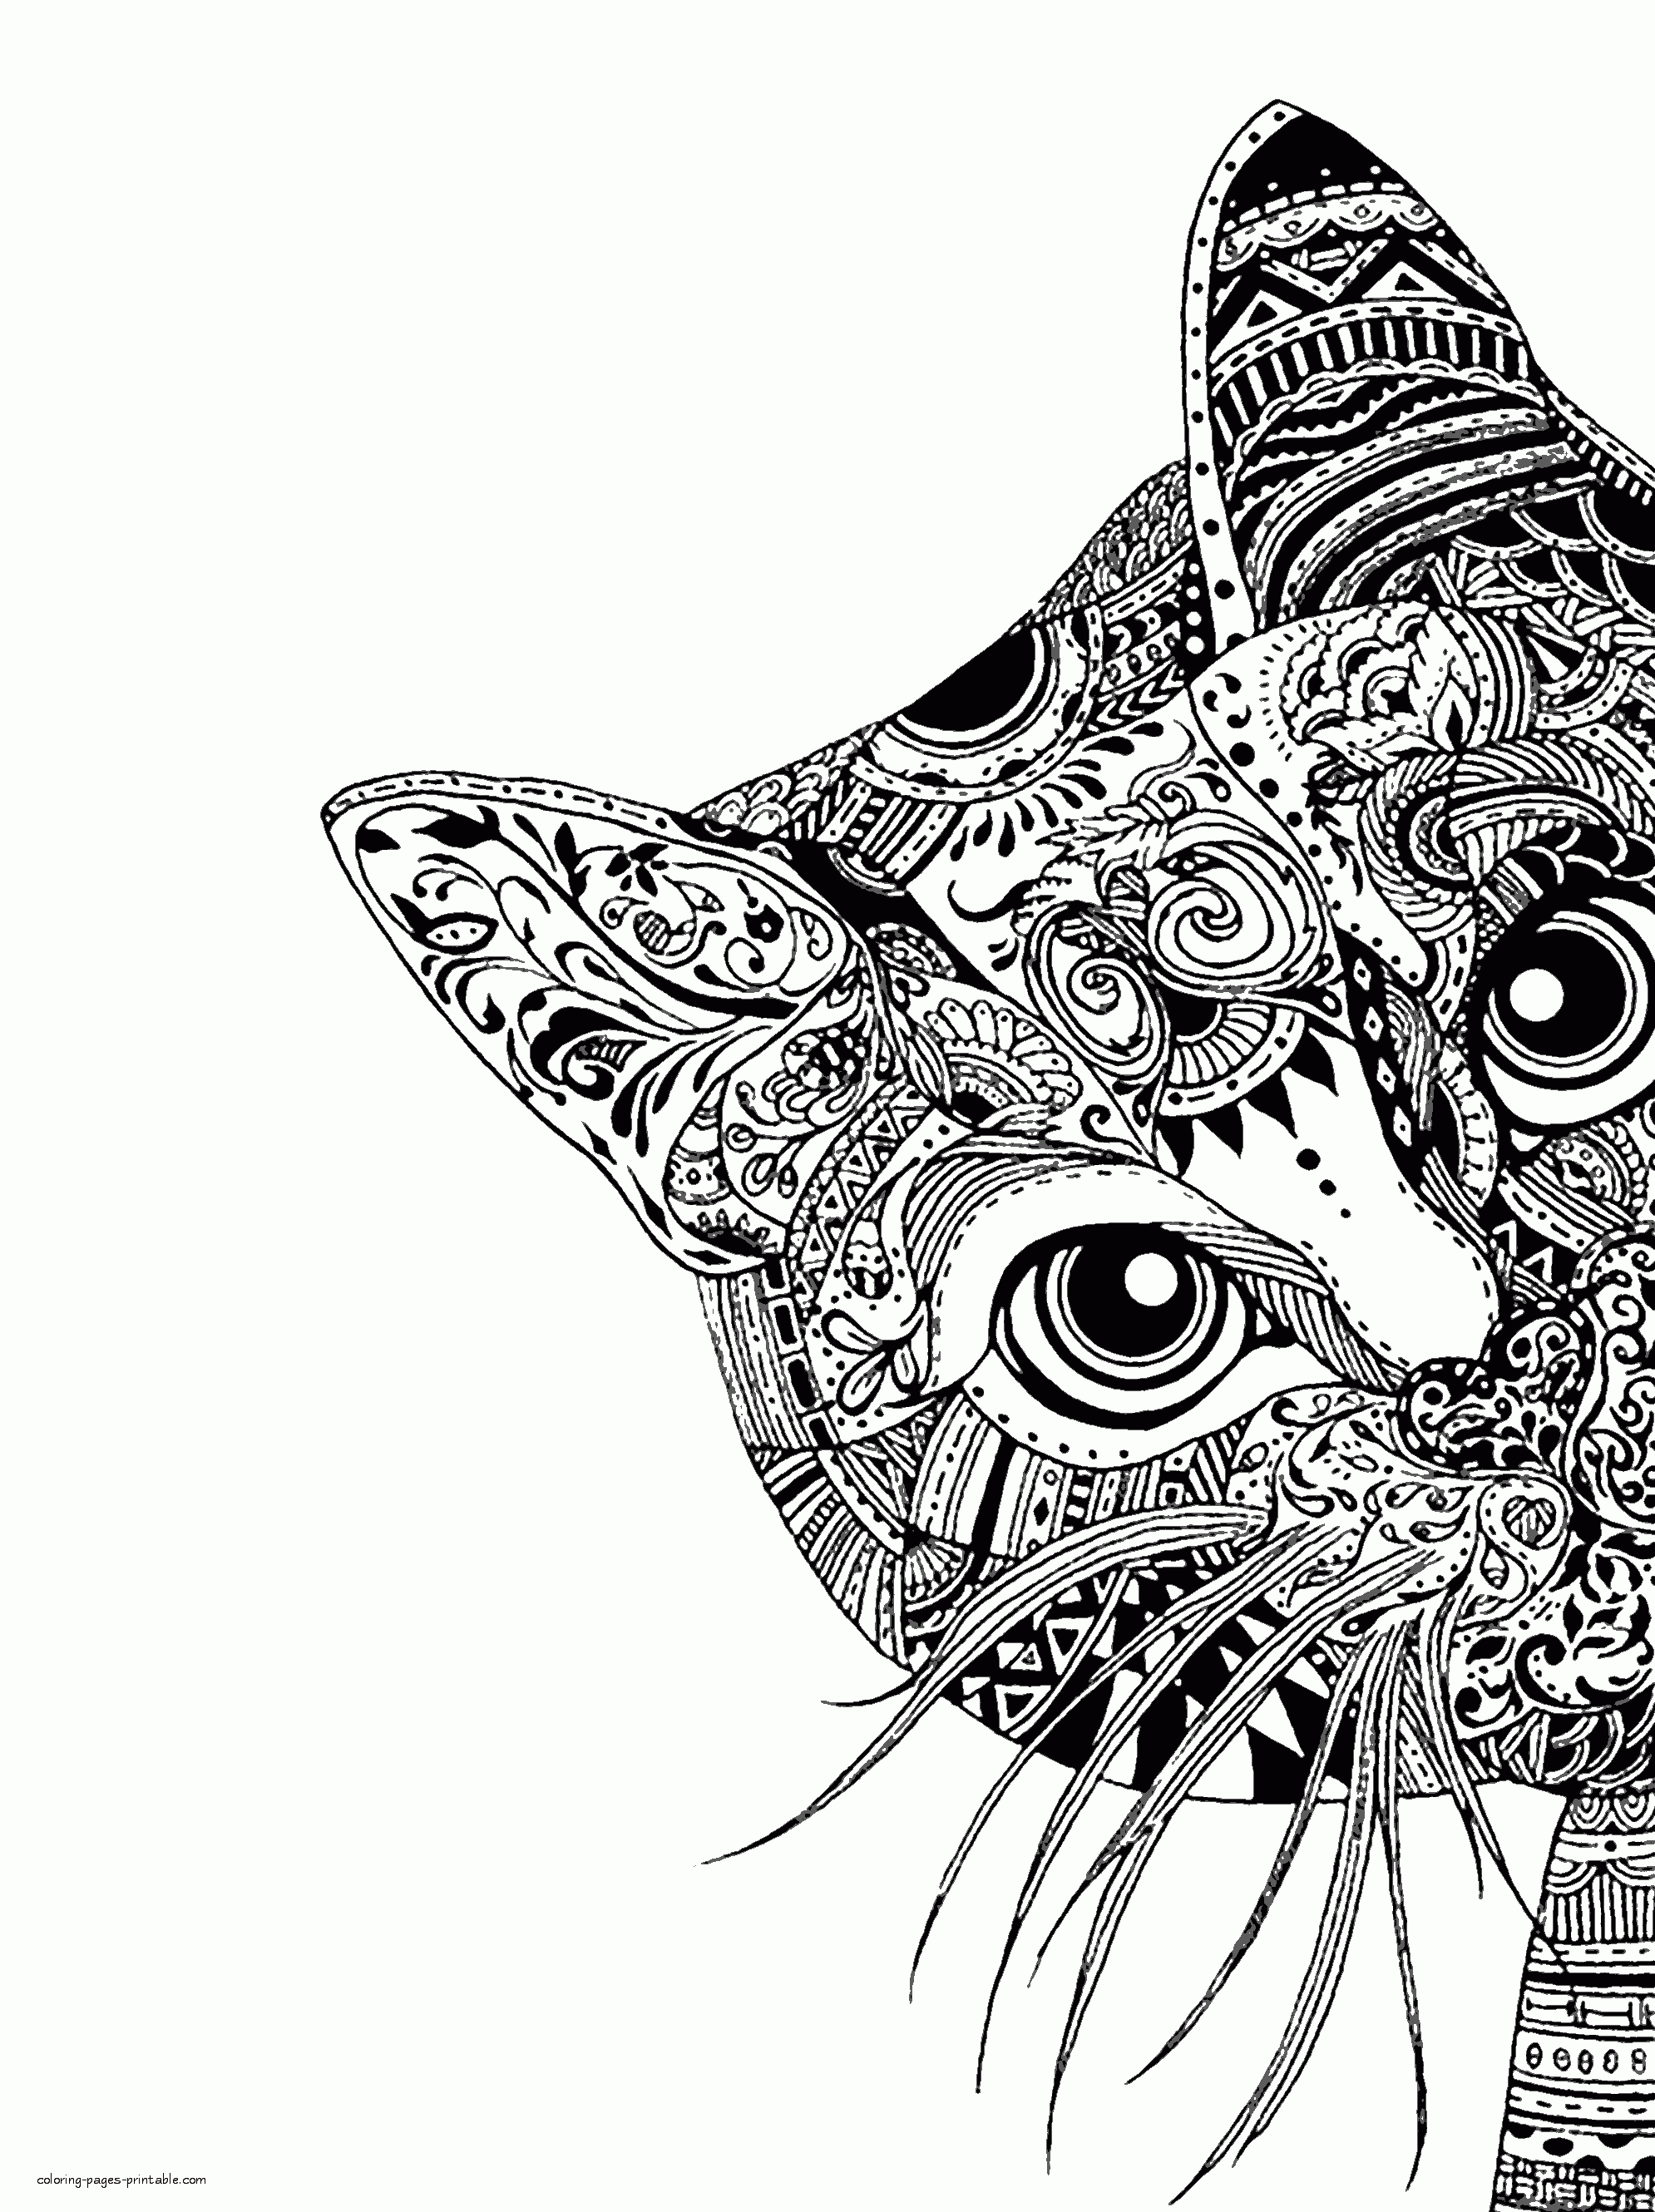 Animal Face Coloring Pages. A Cat    COLORING PAGES PRINTABLE.COM